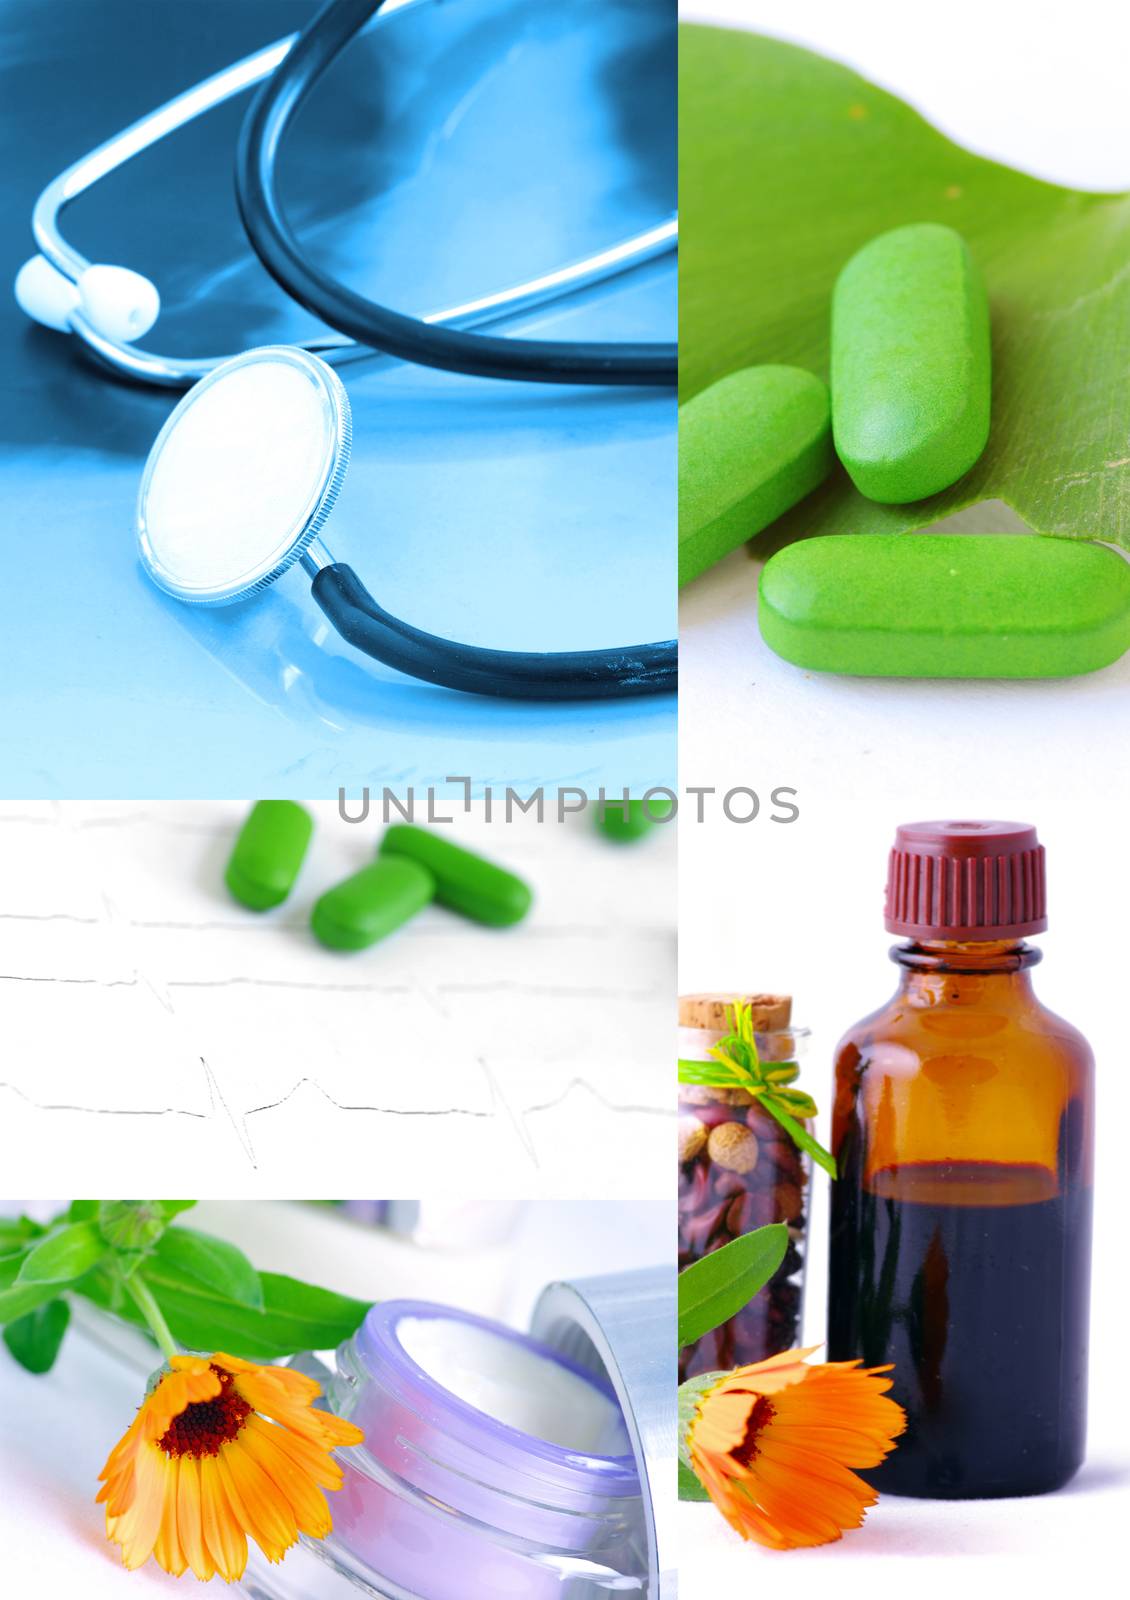 Various homeopathy related images in a collage